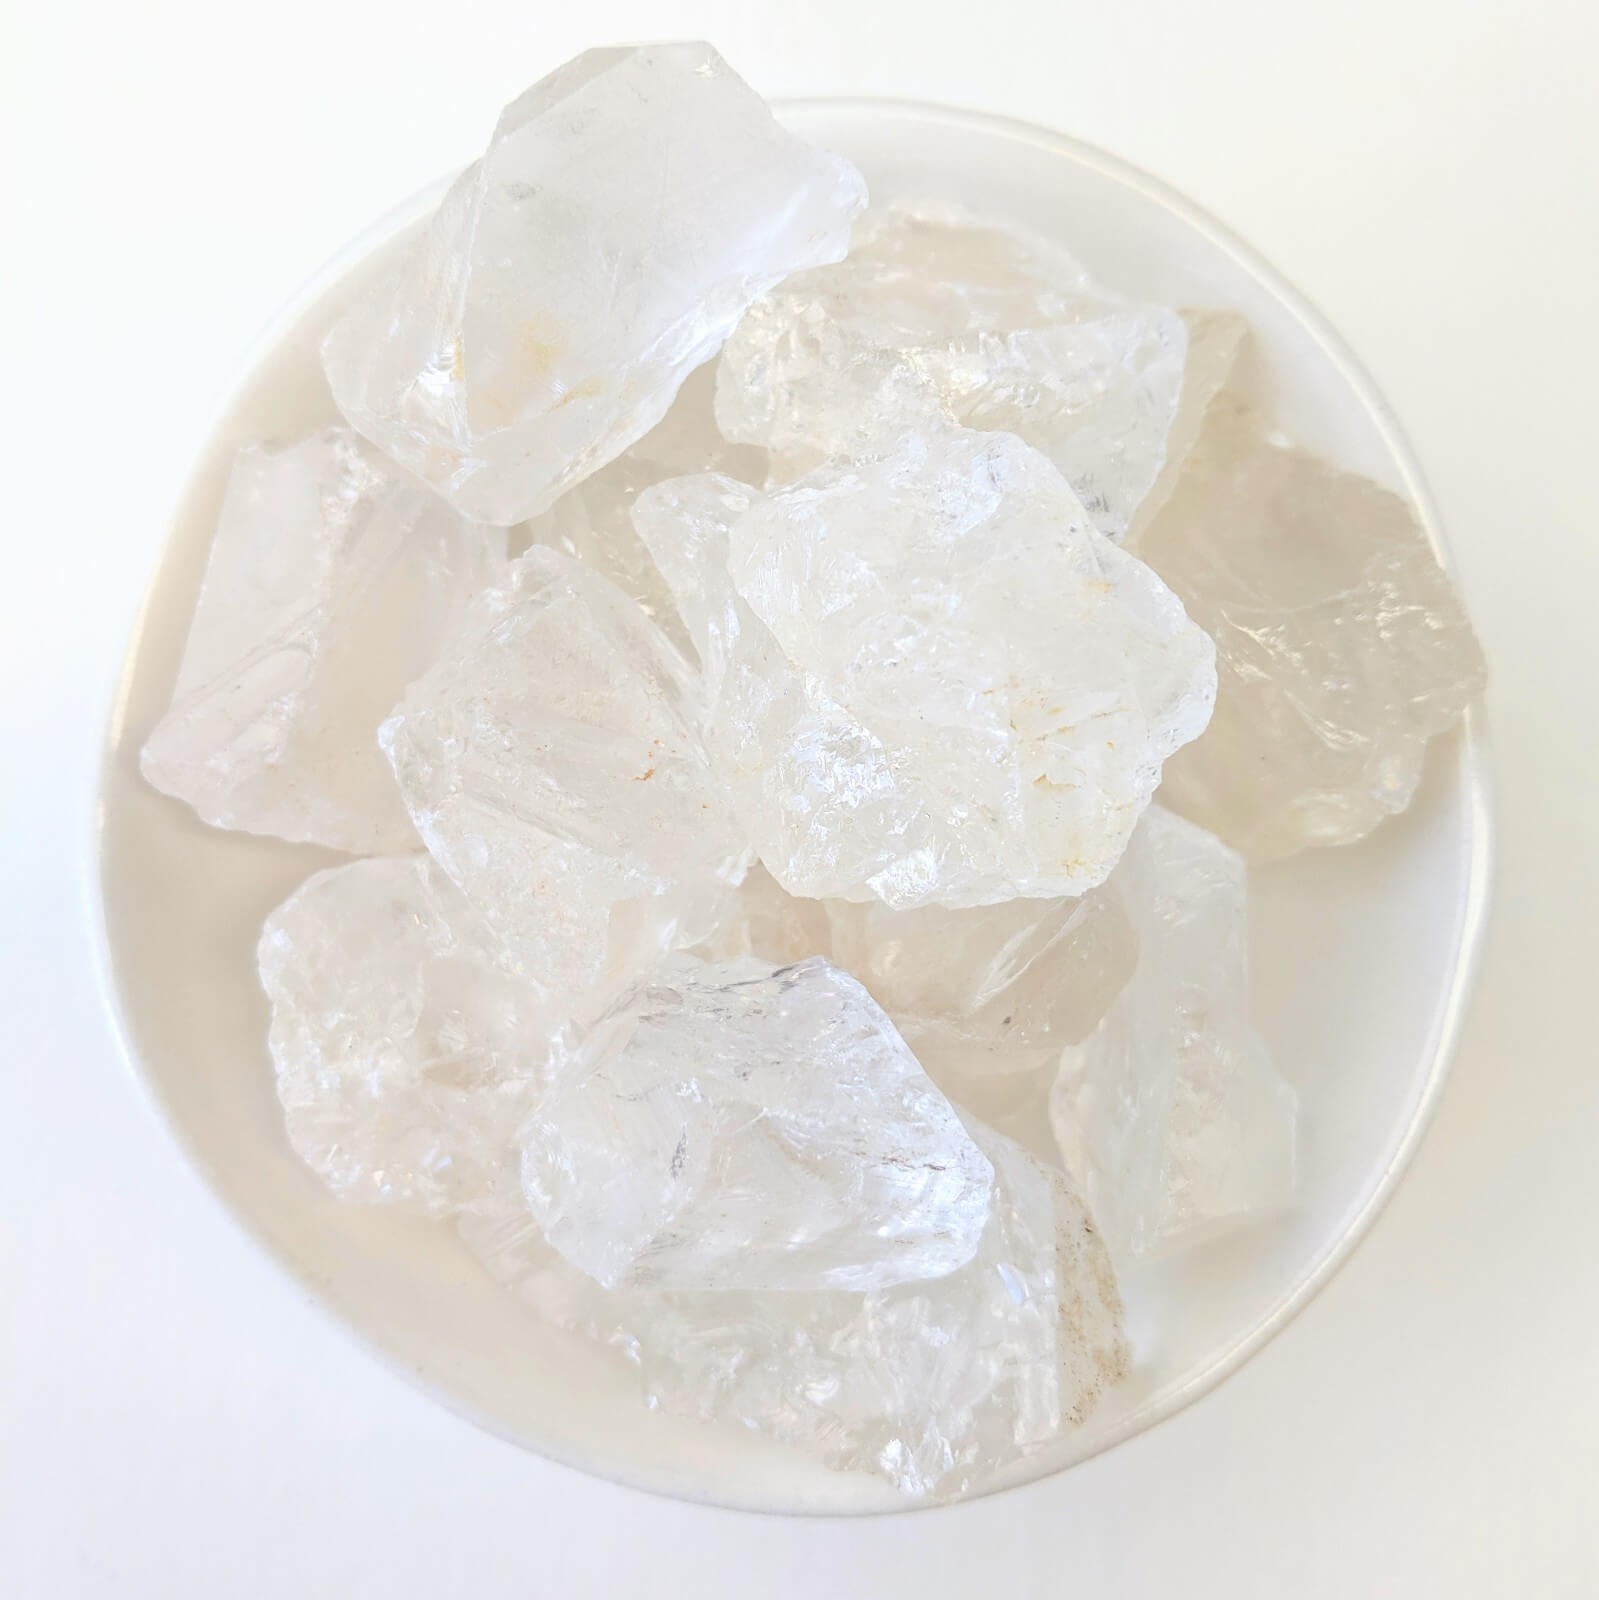 Clear Quartz Crystals Raw In White Bowl - Top View